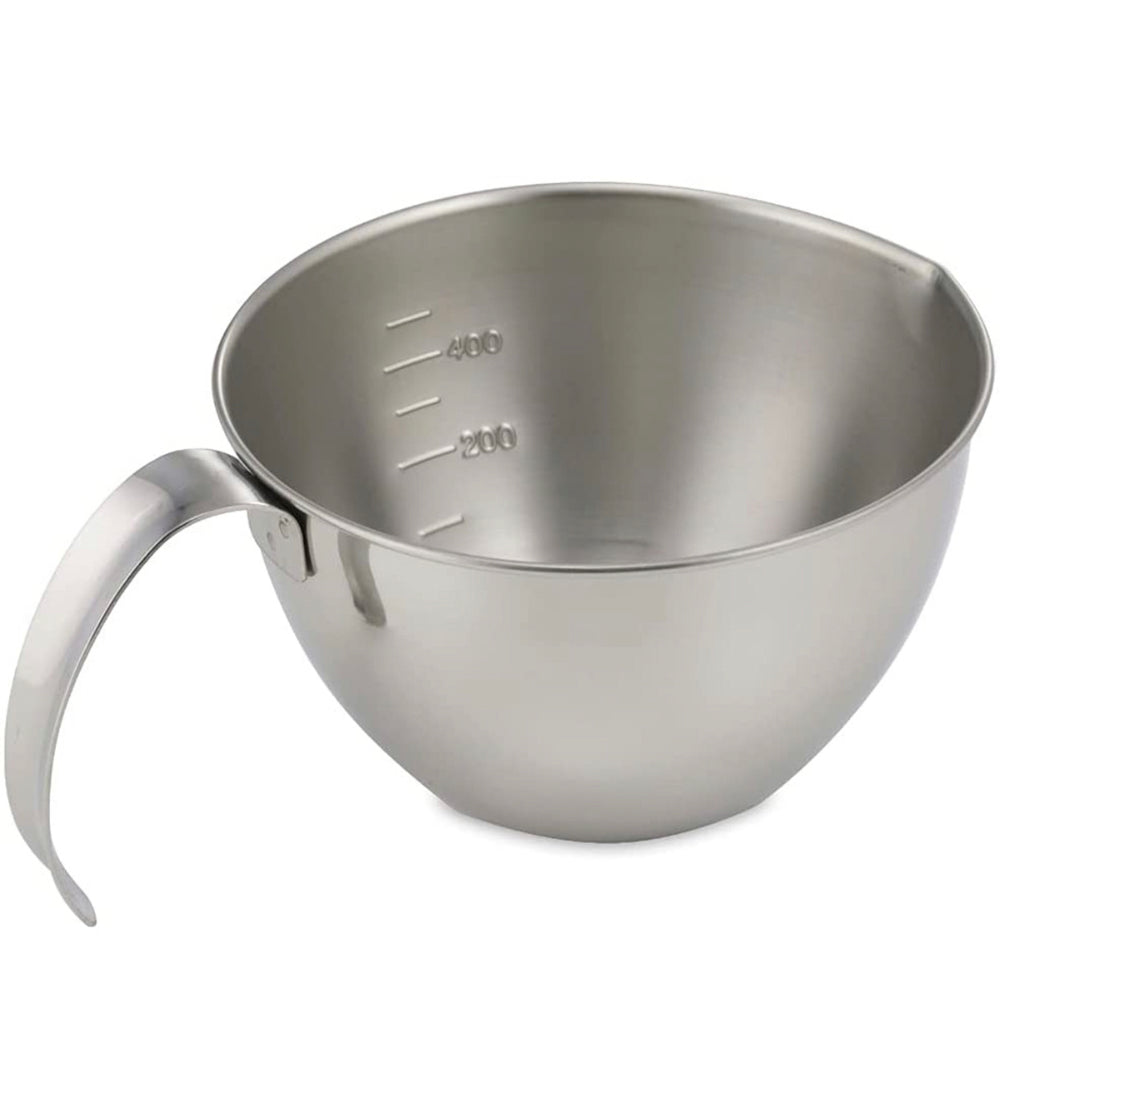 Wholesale stainless steel mixing bowl handle spout Making Every